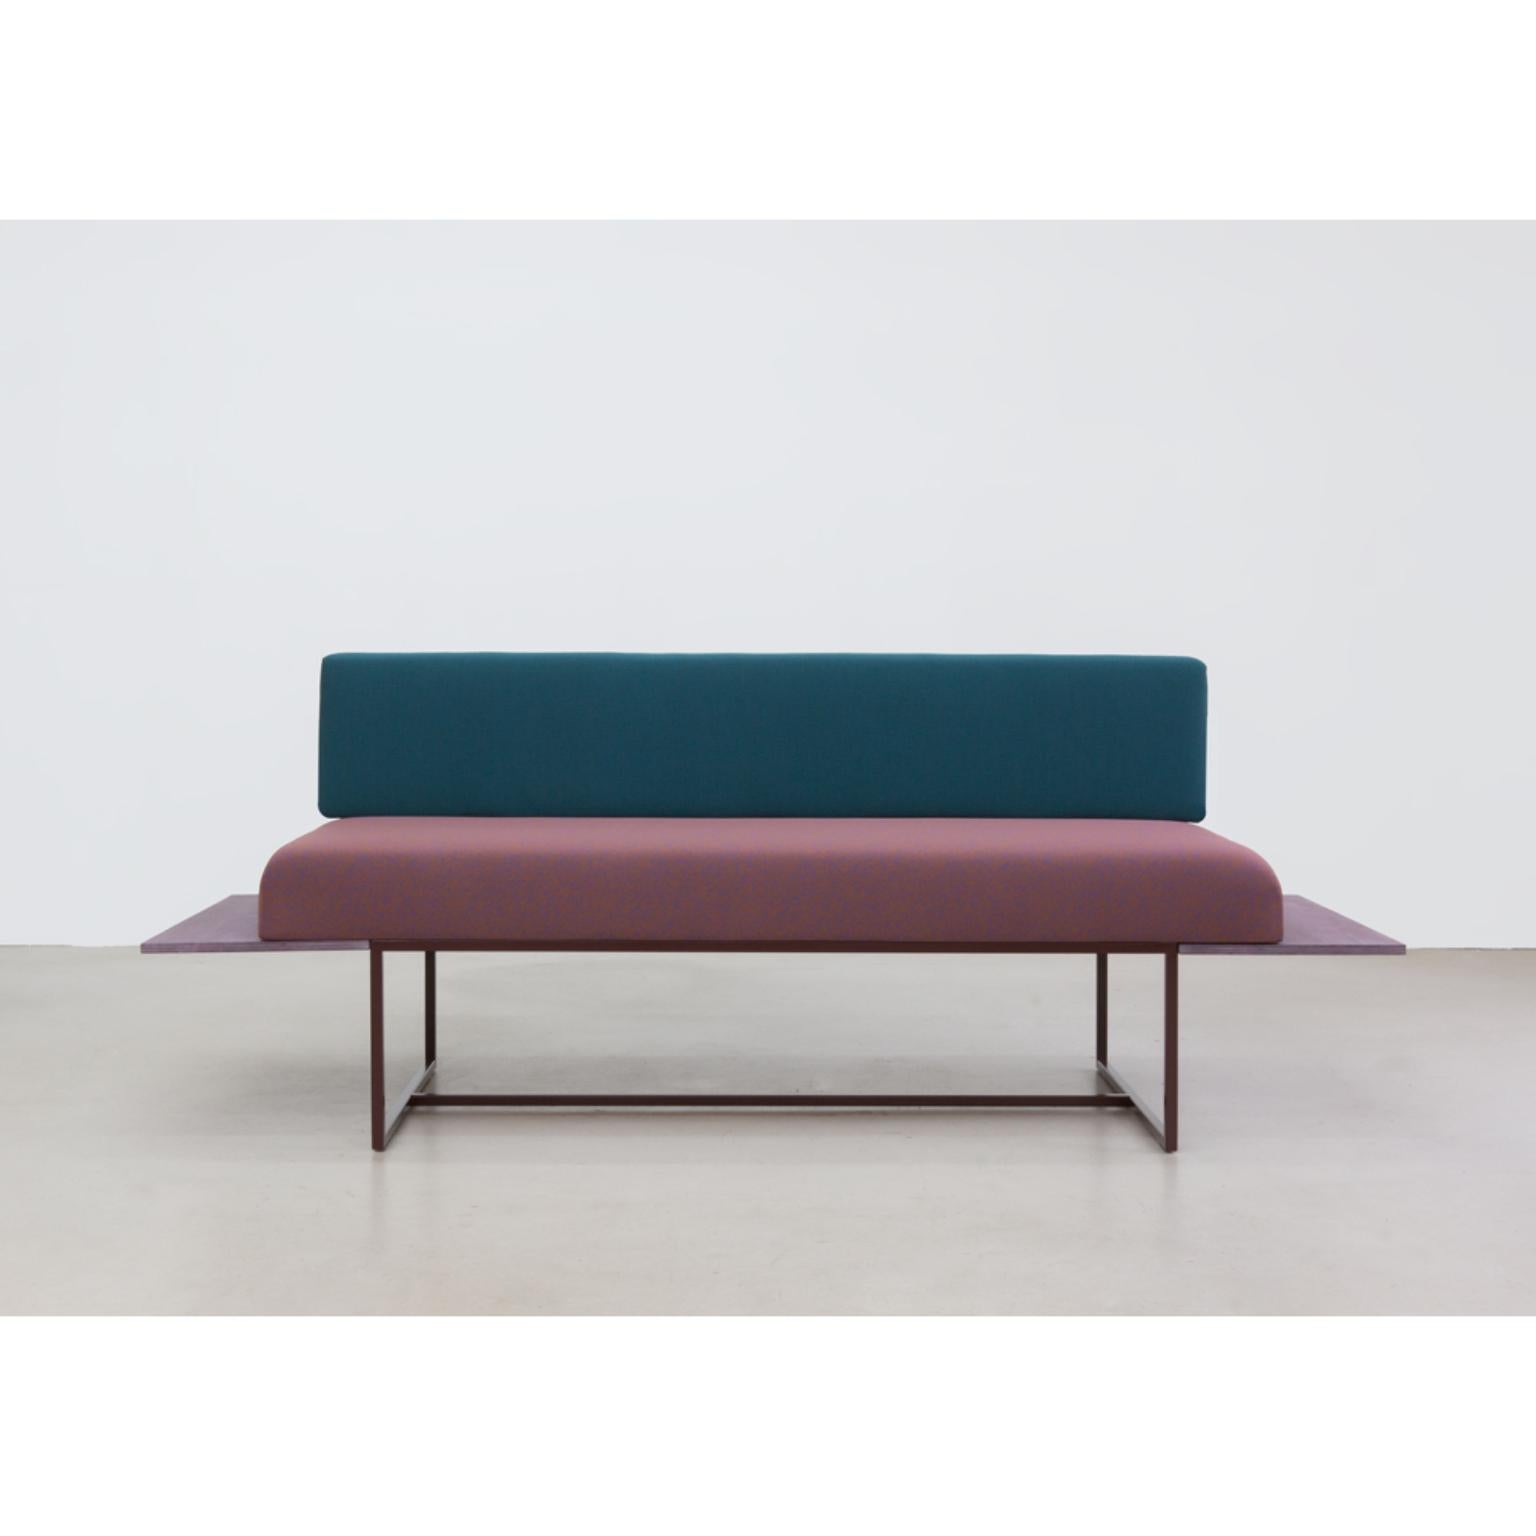 Circus bench by Llot Llov
Dimensions: W 48 x L 210 x H 79 cm
Materials: Powder coated steel, fabrics, birch wood


LLOT LLOV produce exclusive furniture and objects for private or corporate clients and also manage interior design projects such